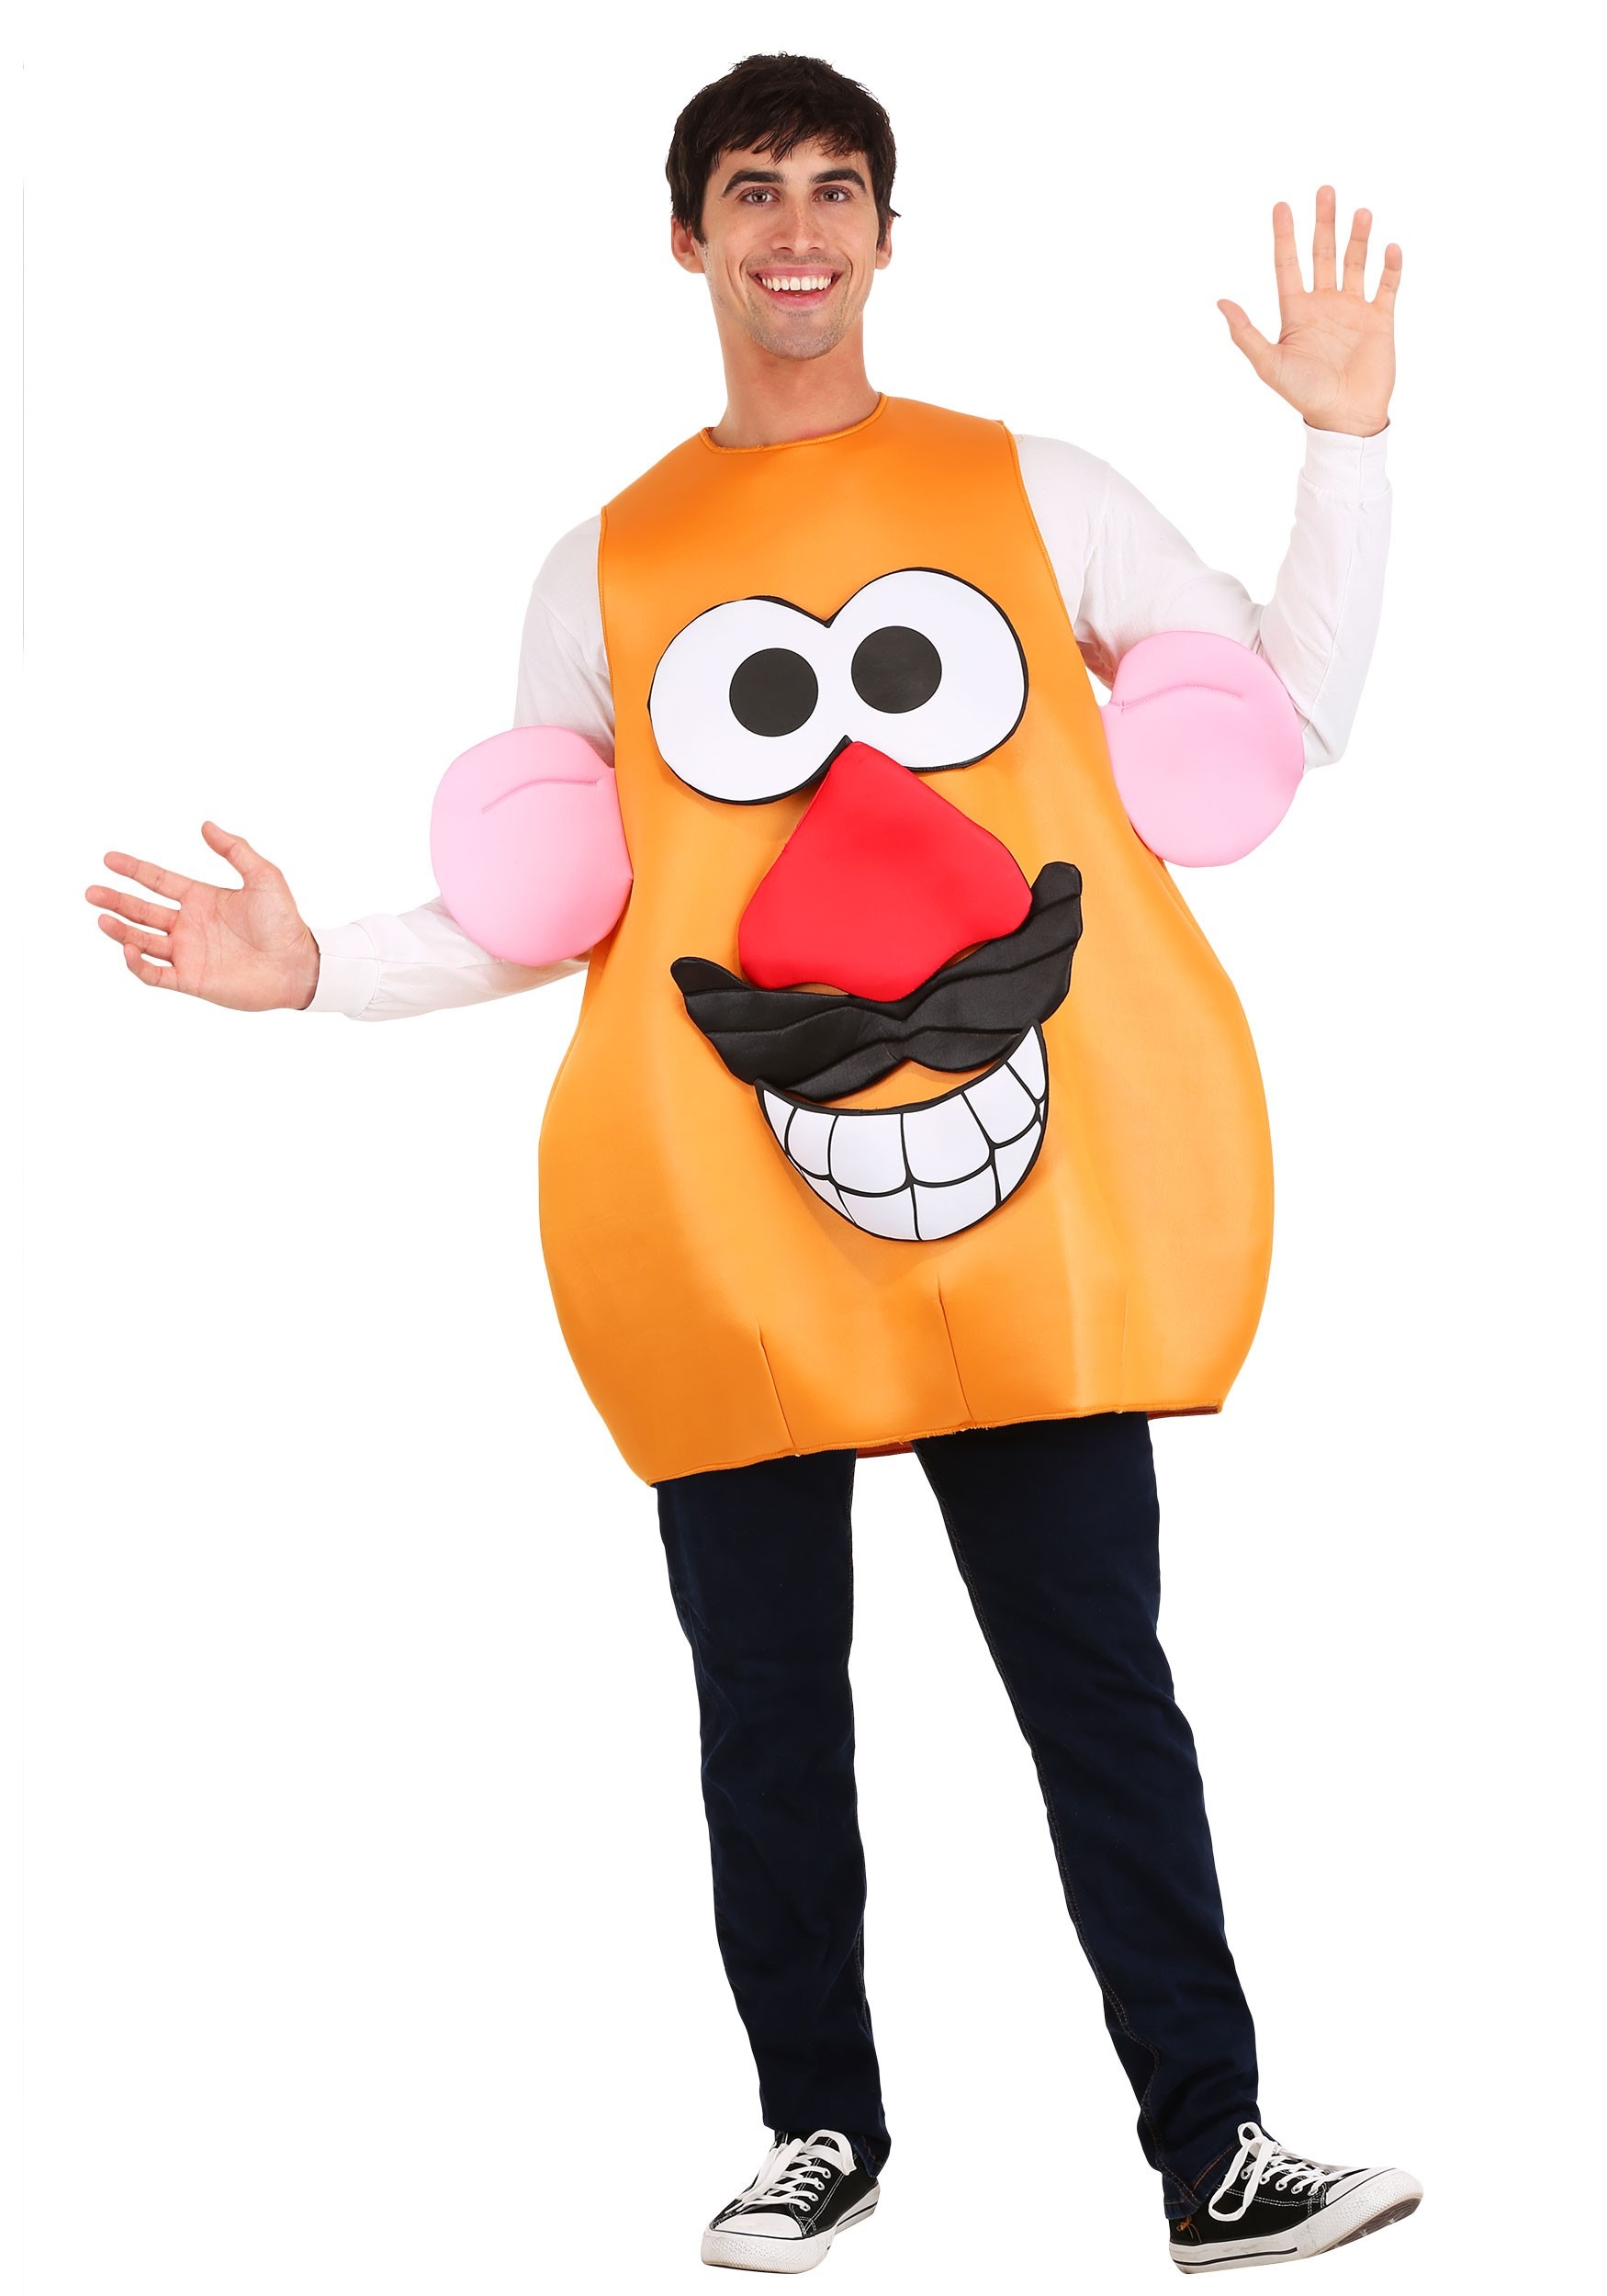 skip Constricted mere Mr/Mrs Potato Head Plus Size Costume for Adults | Toy Story Couple Costumes